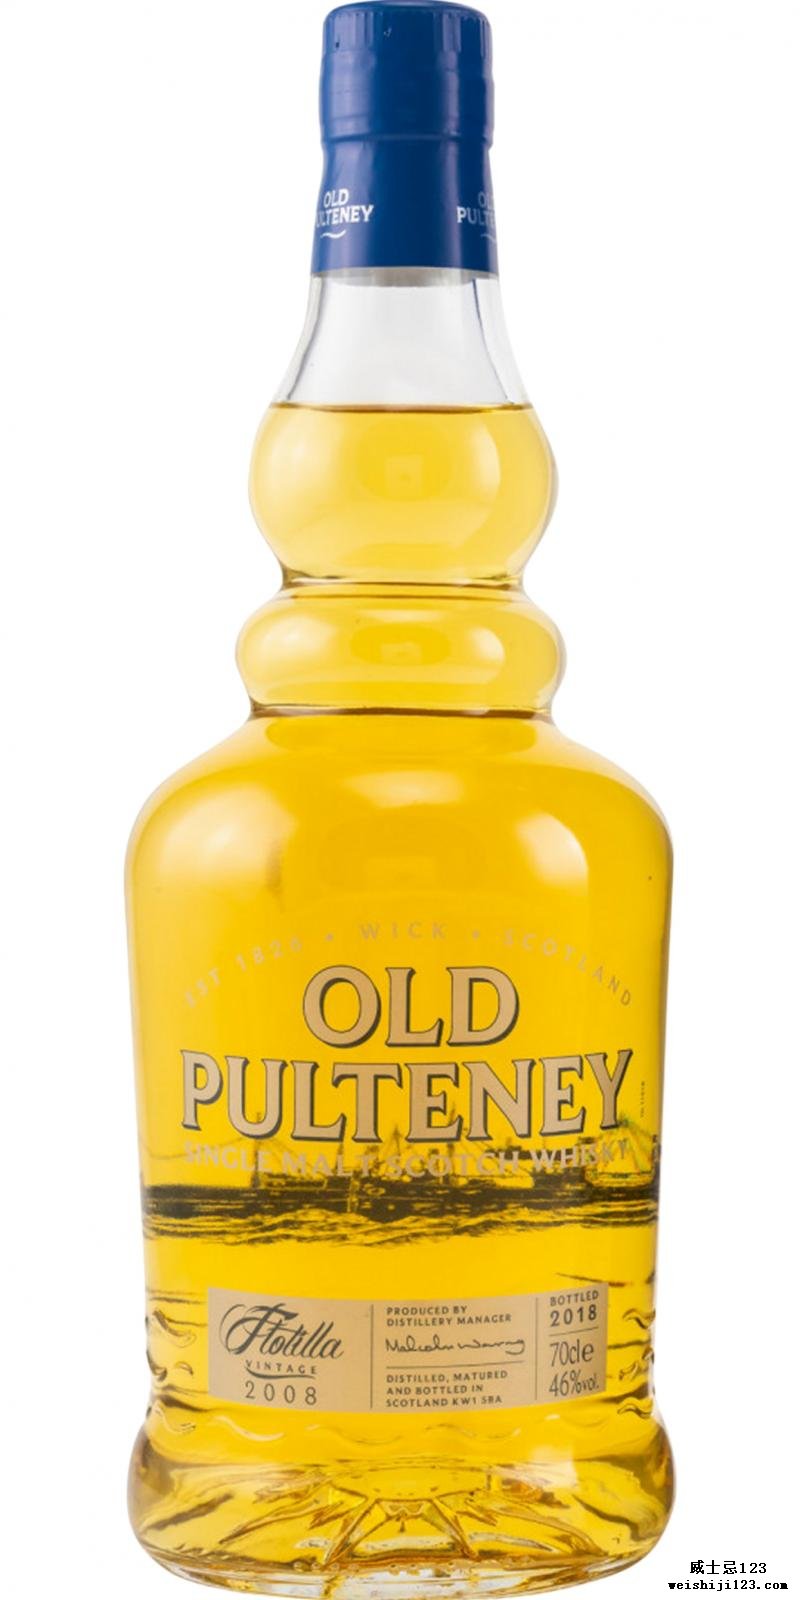 Old Pulteney 2008